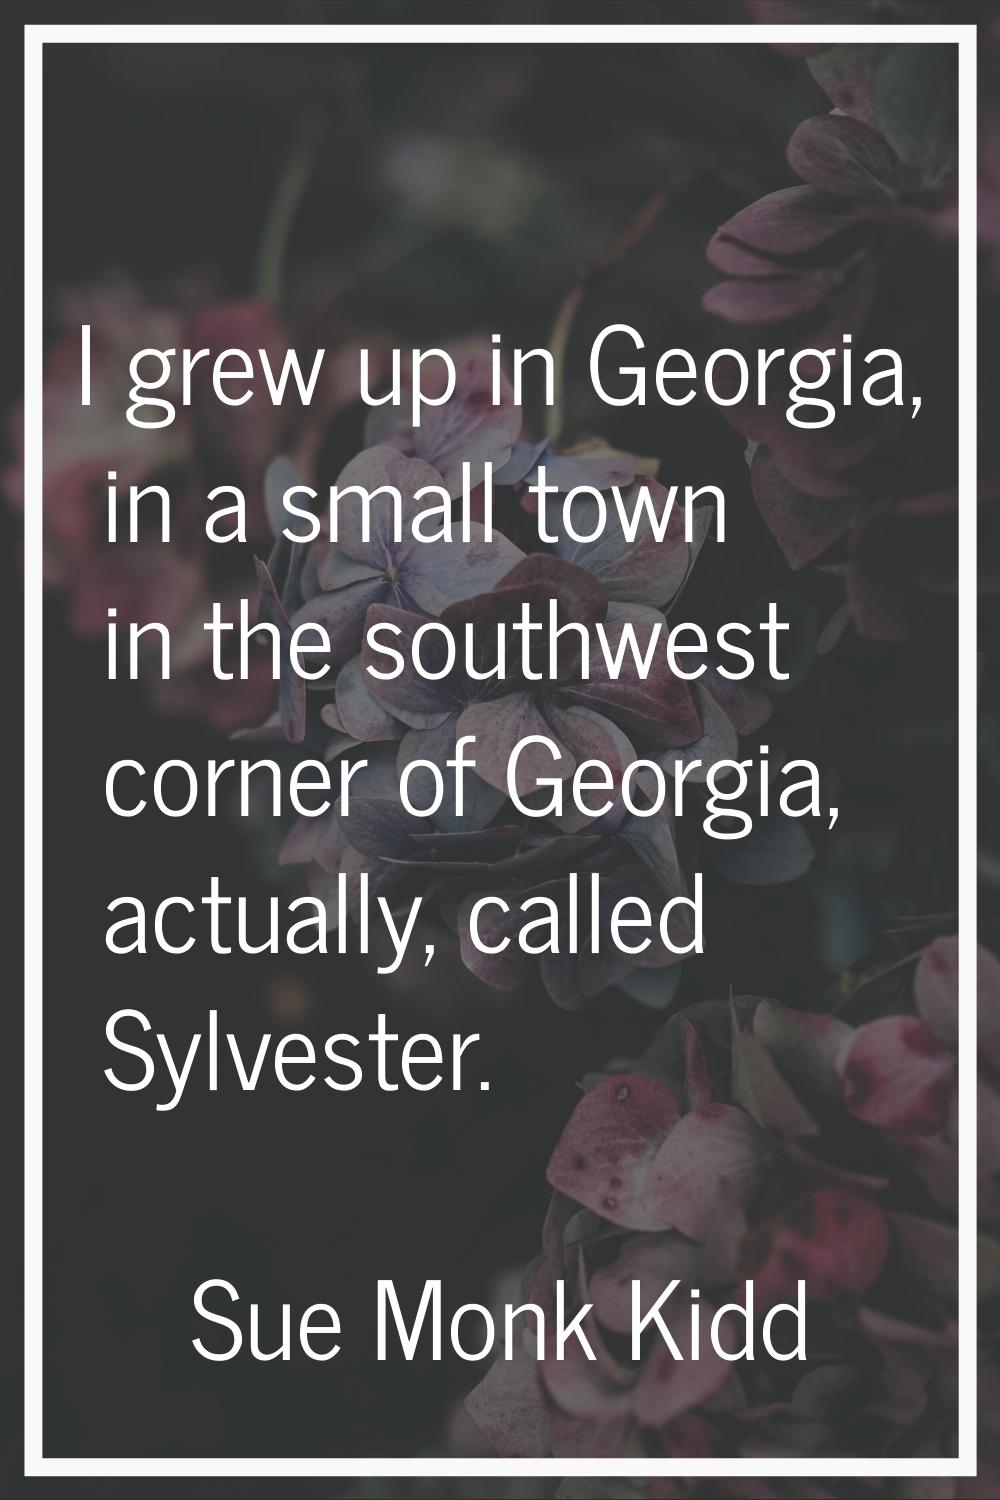 I grew up in Georgia, in a small town in the southwest corner of Georgia, actually, called Sylveste